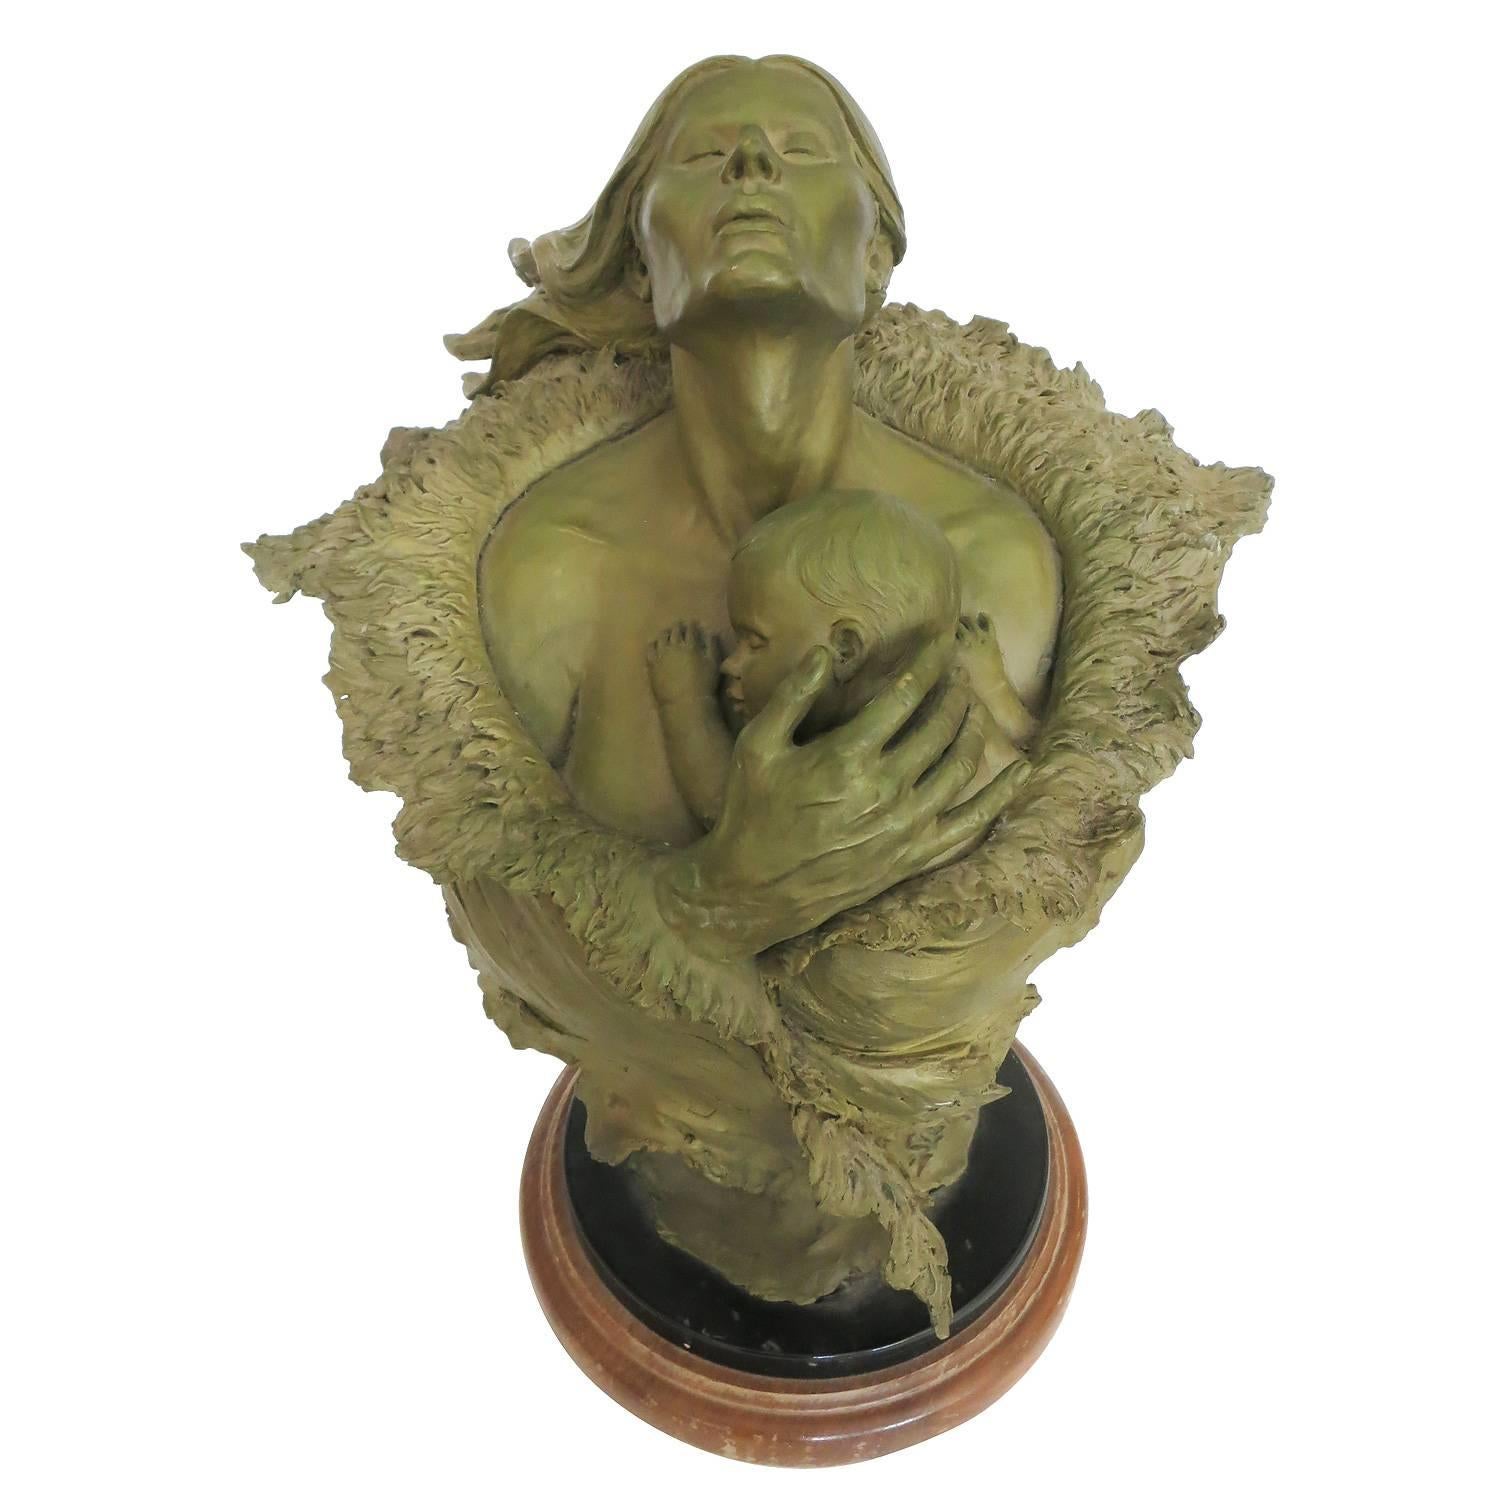 Post-Modern Rare Mother and Child Sculpture Bust by Joe Slockbower for Mill Creek Studios For Sale